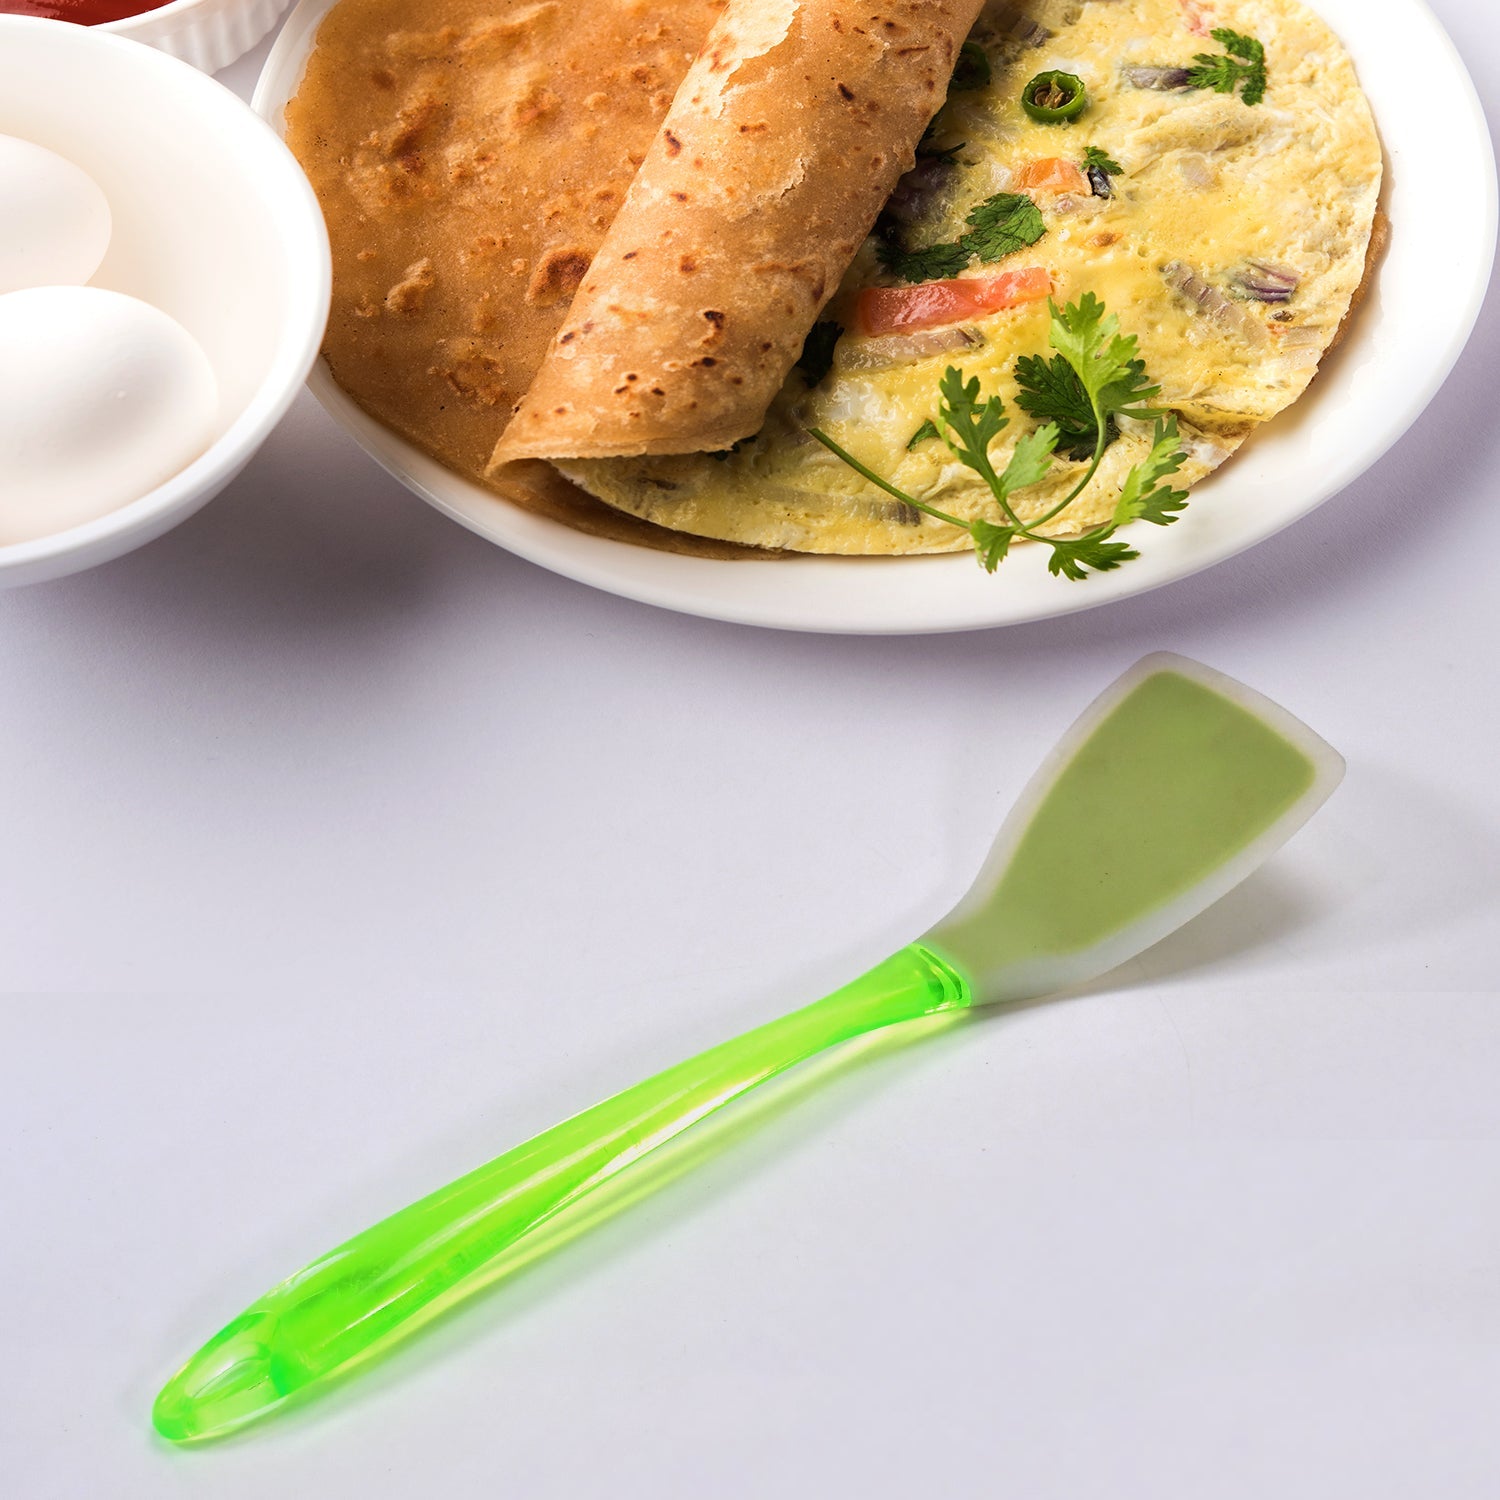 2753 34cm KITCHEN TURNER HEAT RESISTANT SILICONE NON-STICK SILICONE TURNER GRIP WITH LONG HANDLE COOKING TURNER DeoDap